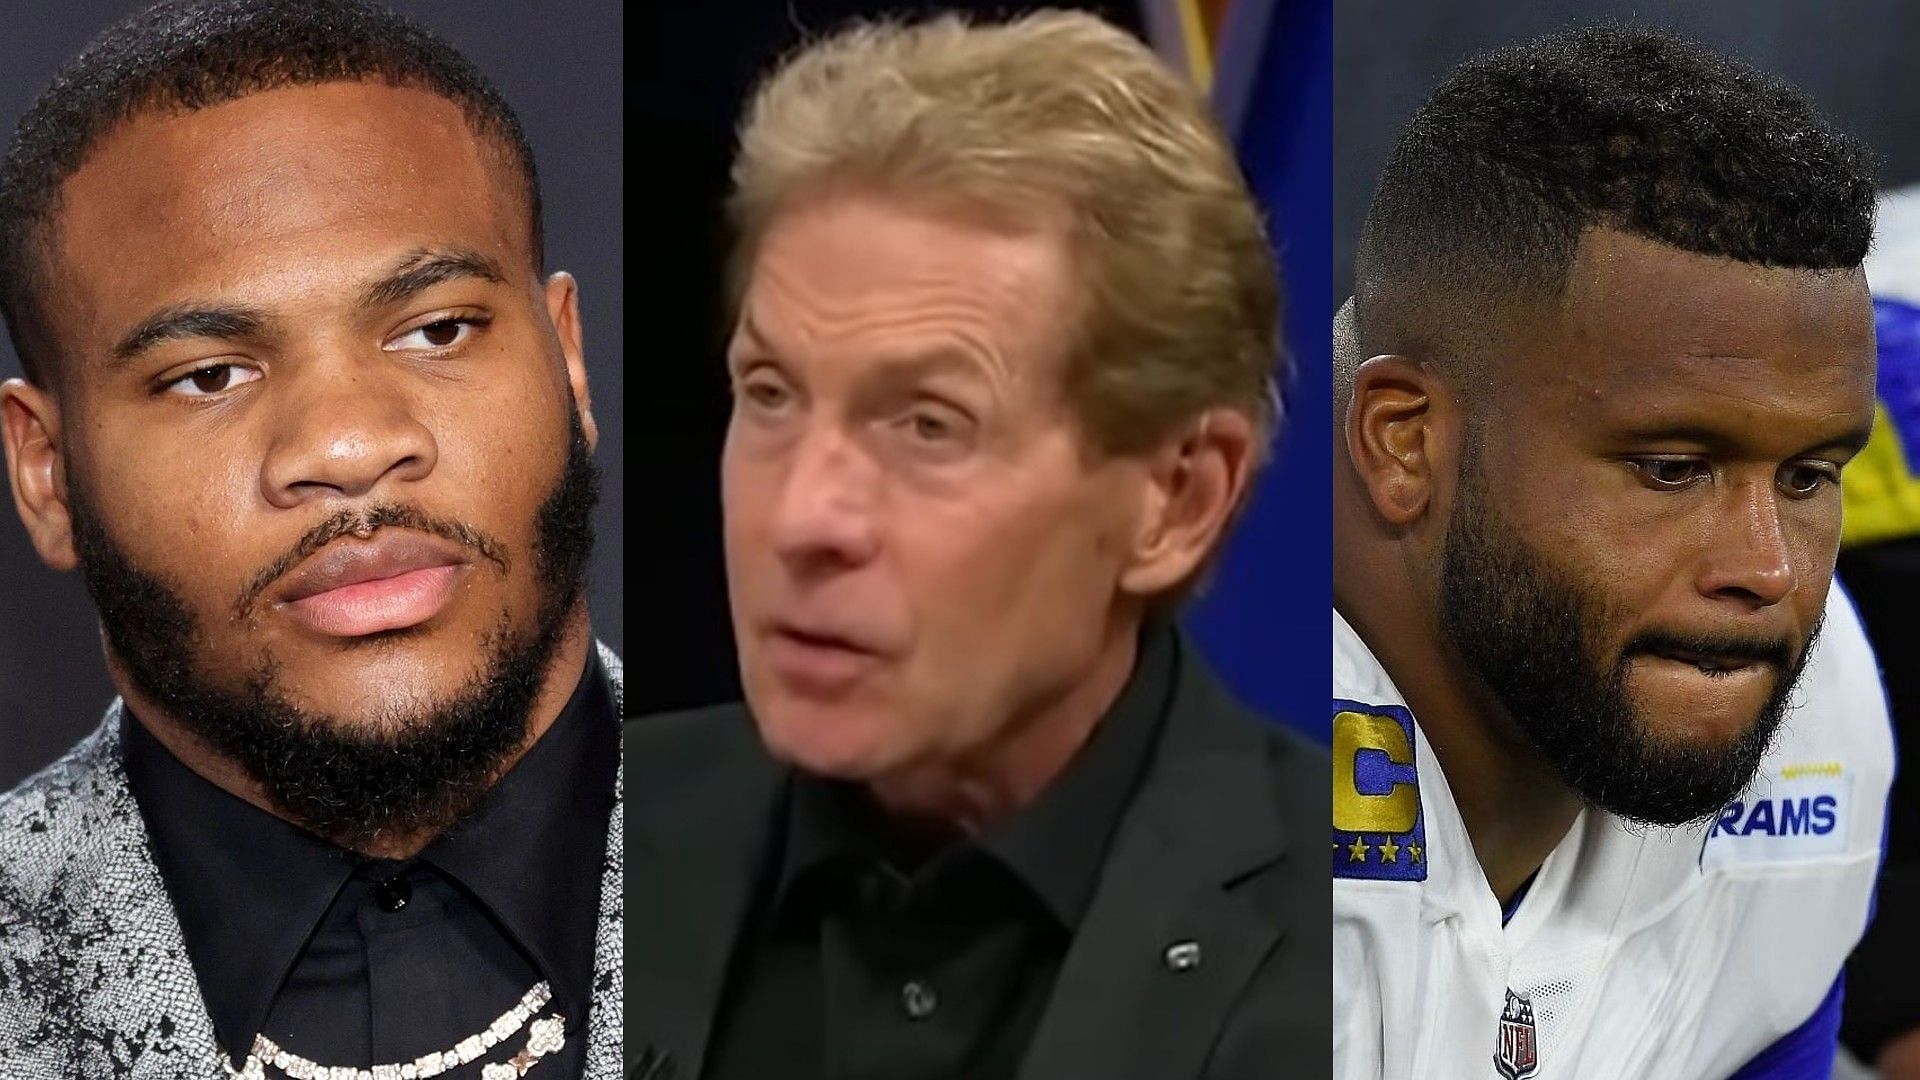 Skip Bayless discourages Micah Parsons from chasing Aaron Donald - Courtesy of Undisputed on YouTube